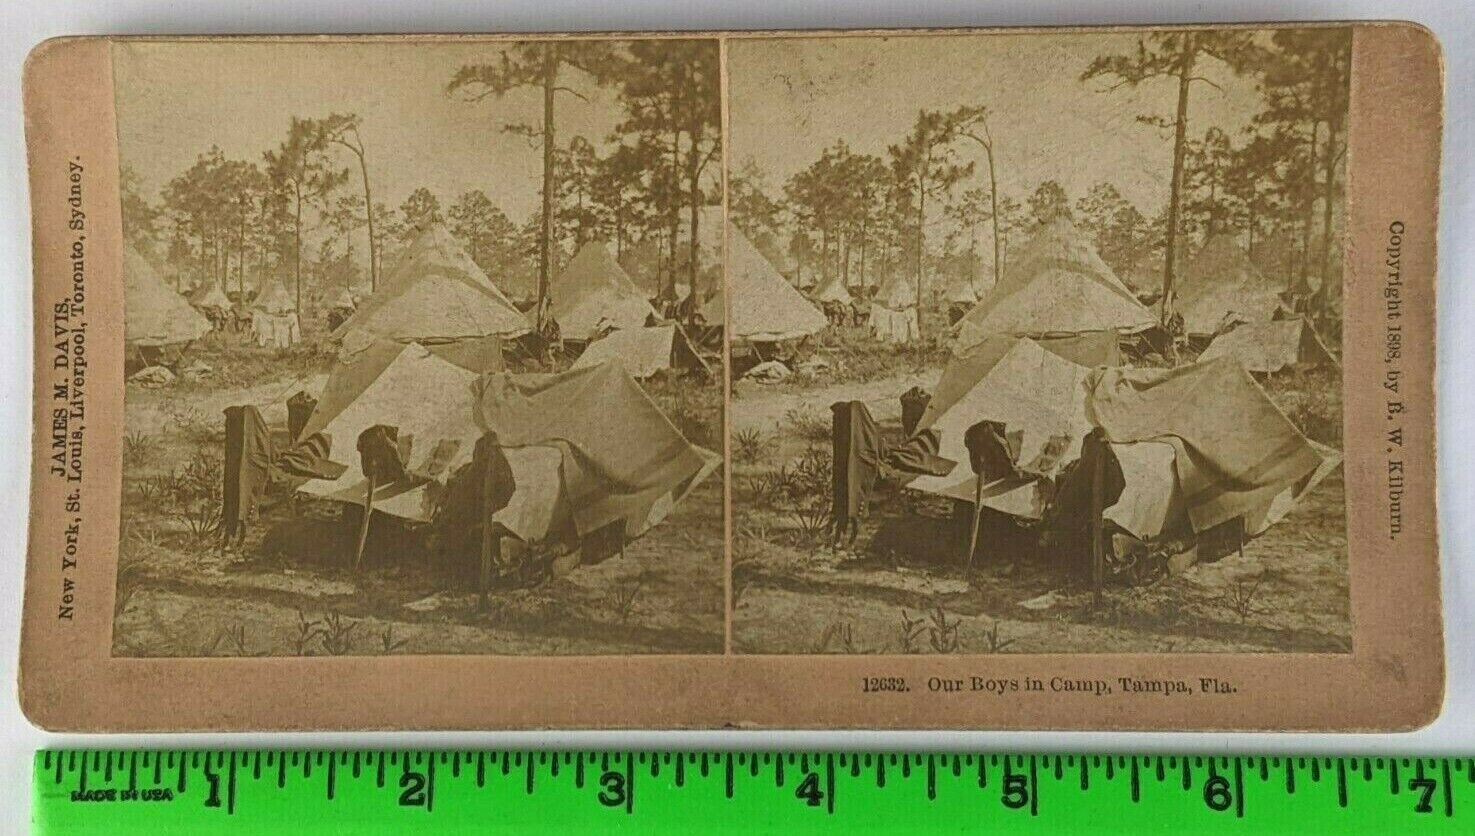 Vintage 1898 Our Boys in Camp Tampa FL Soldier Tents Encampment Stereoview Card